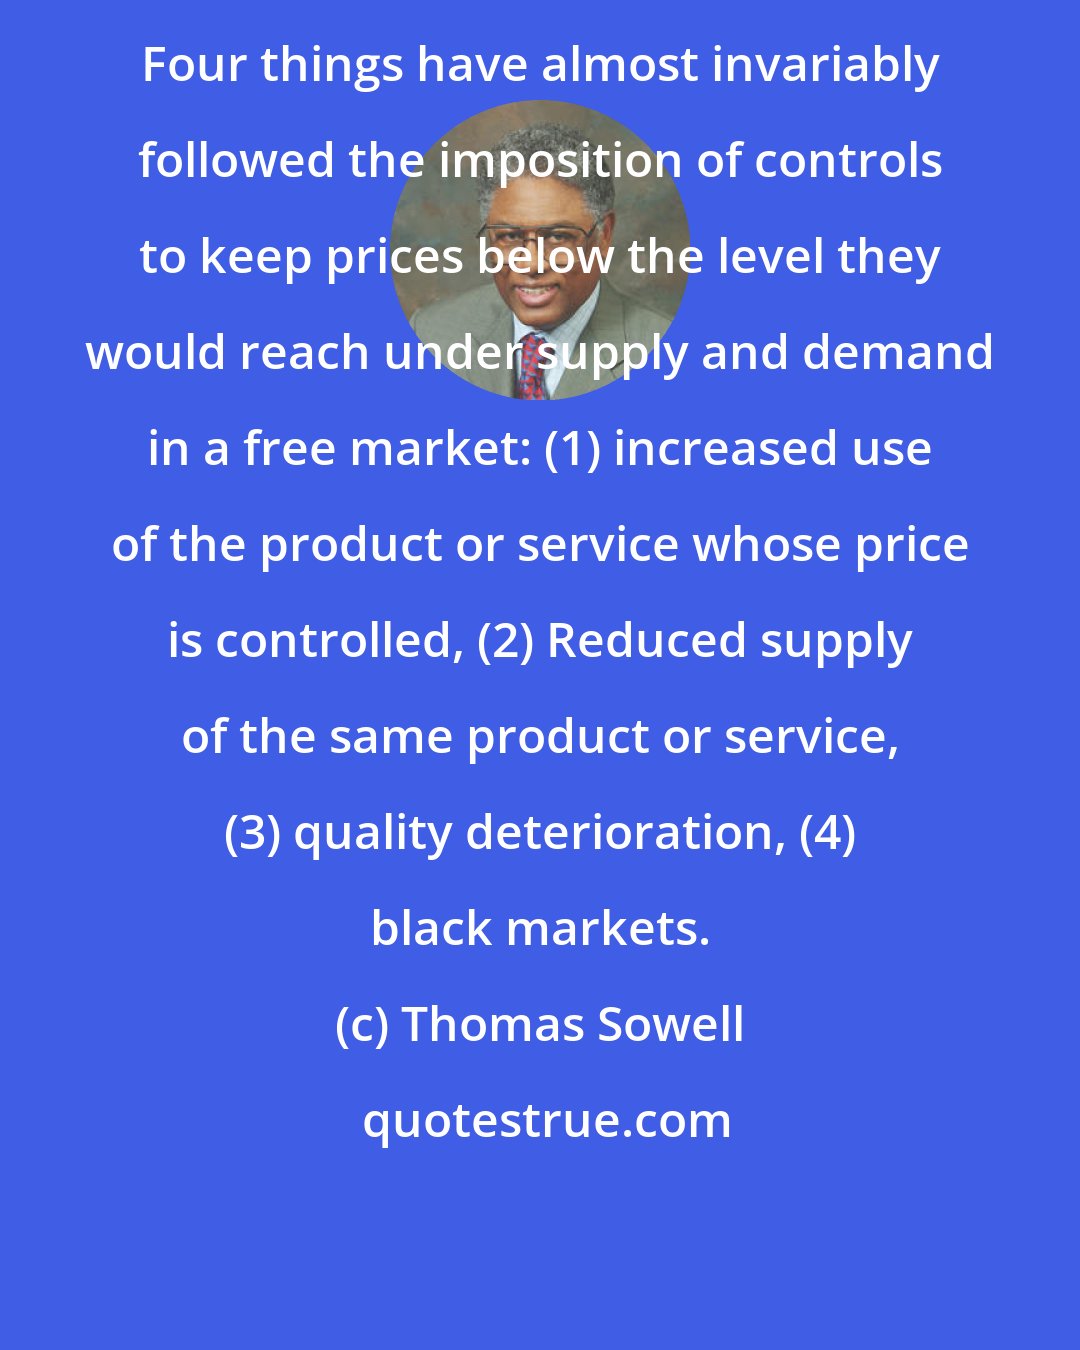 Thomas Sowell: Four things have almost invariably followed the imposition of controls to keep prices below the level they would reach under supply and demand in a free market: (1) increased use of the product or service whose price is controlled, (2) Reduced supply of the same product or service, (3) quality deterioration, (4) black markets.